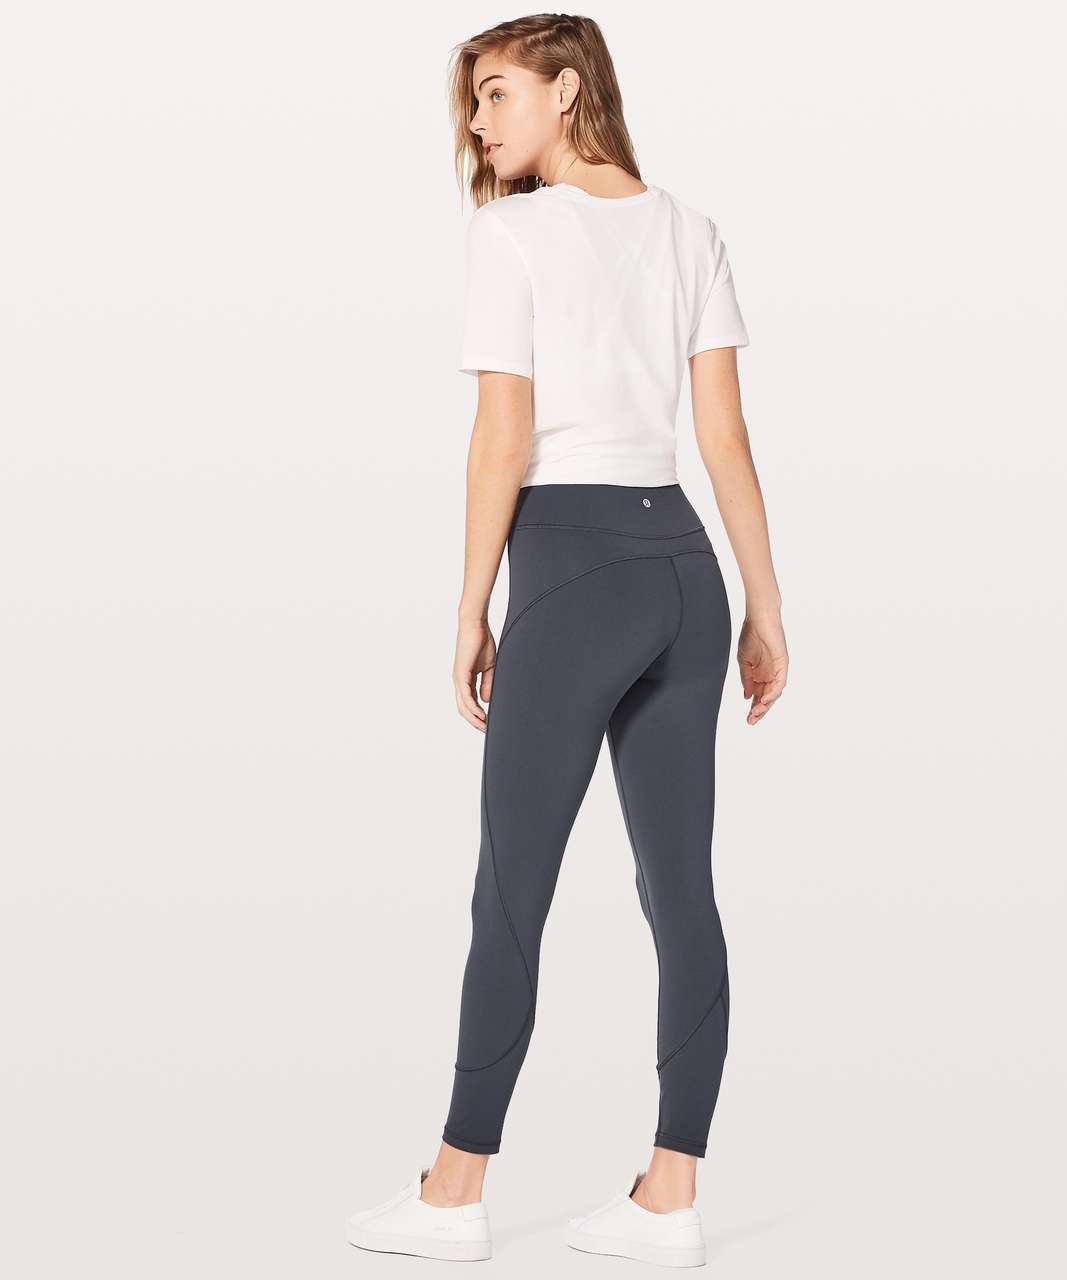 Lululemon In Movement 7/8 Tight *Everlux 25" - Blue Tied